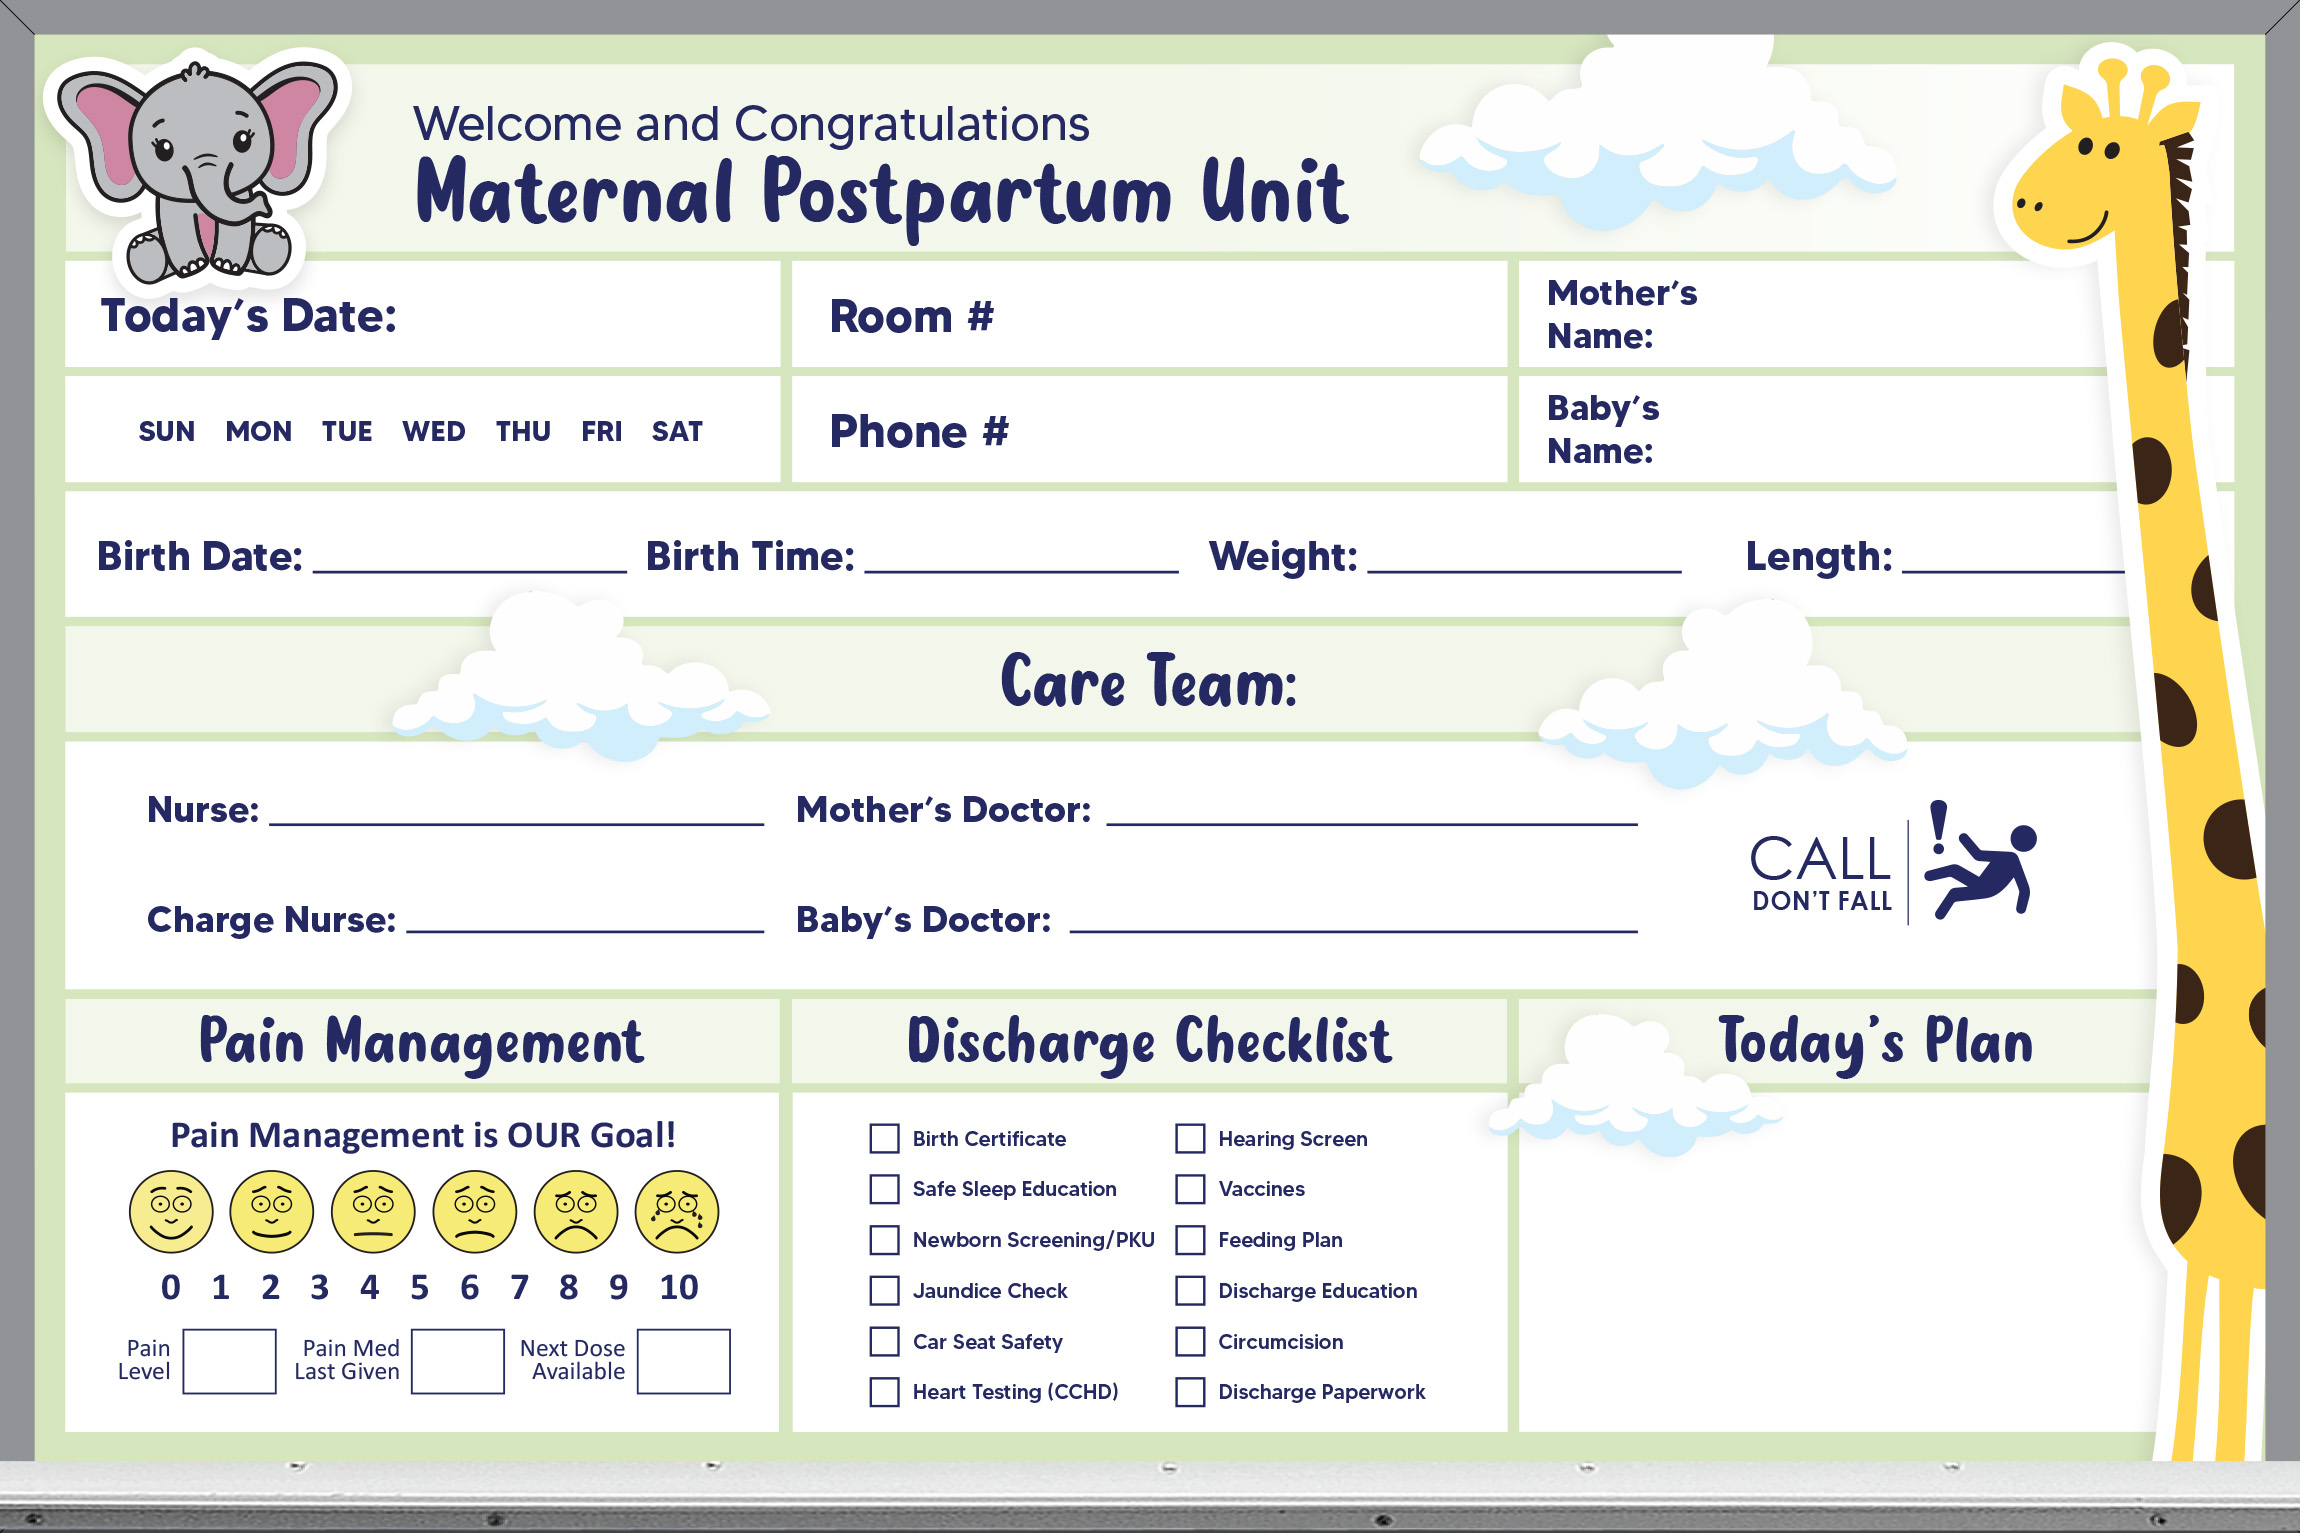 2x3 maternity room whiteboard - pre-printed, green background